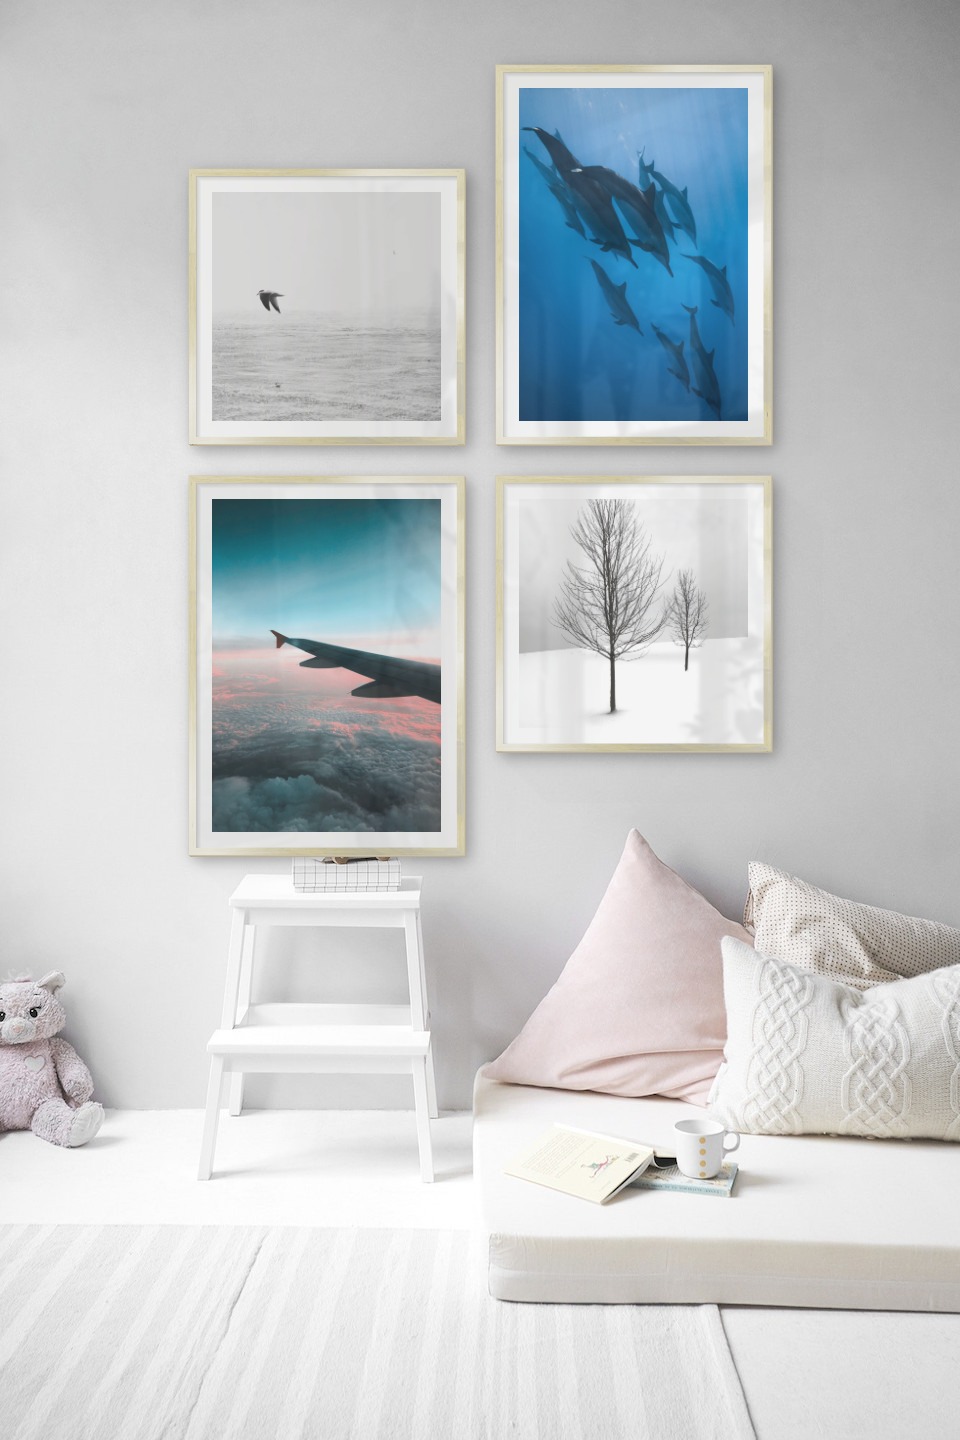 Gallery wall with picture frames in gold in sizes 50x50 and 50x70 with prints "Birds over the sea", "Dolphins", "Above the clouds" and "Trees in the snow"